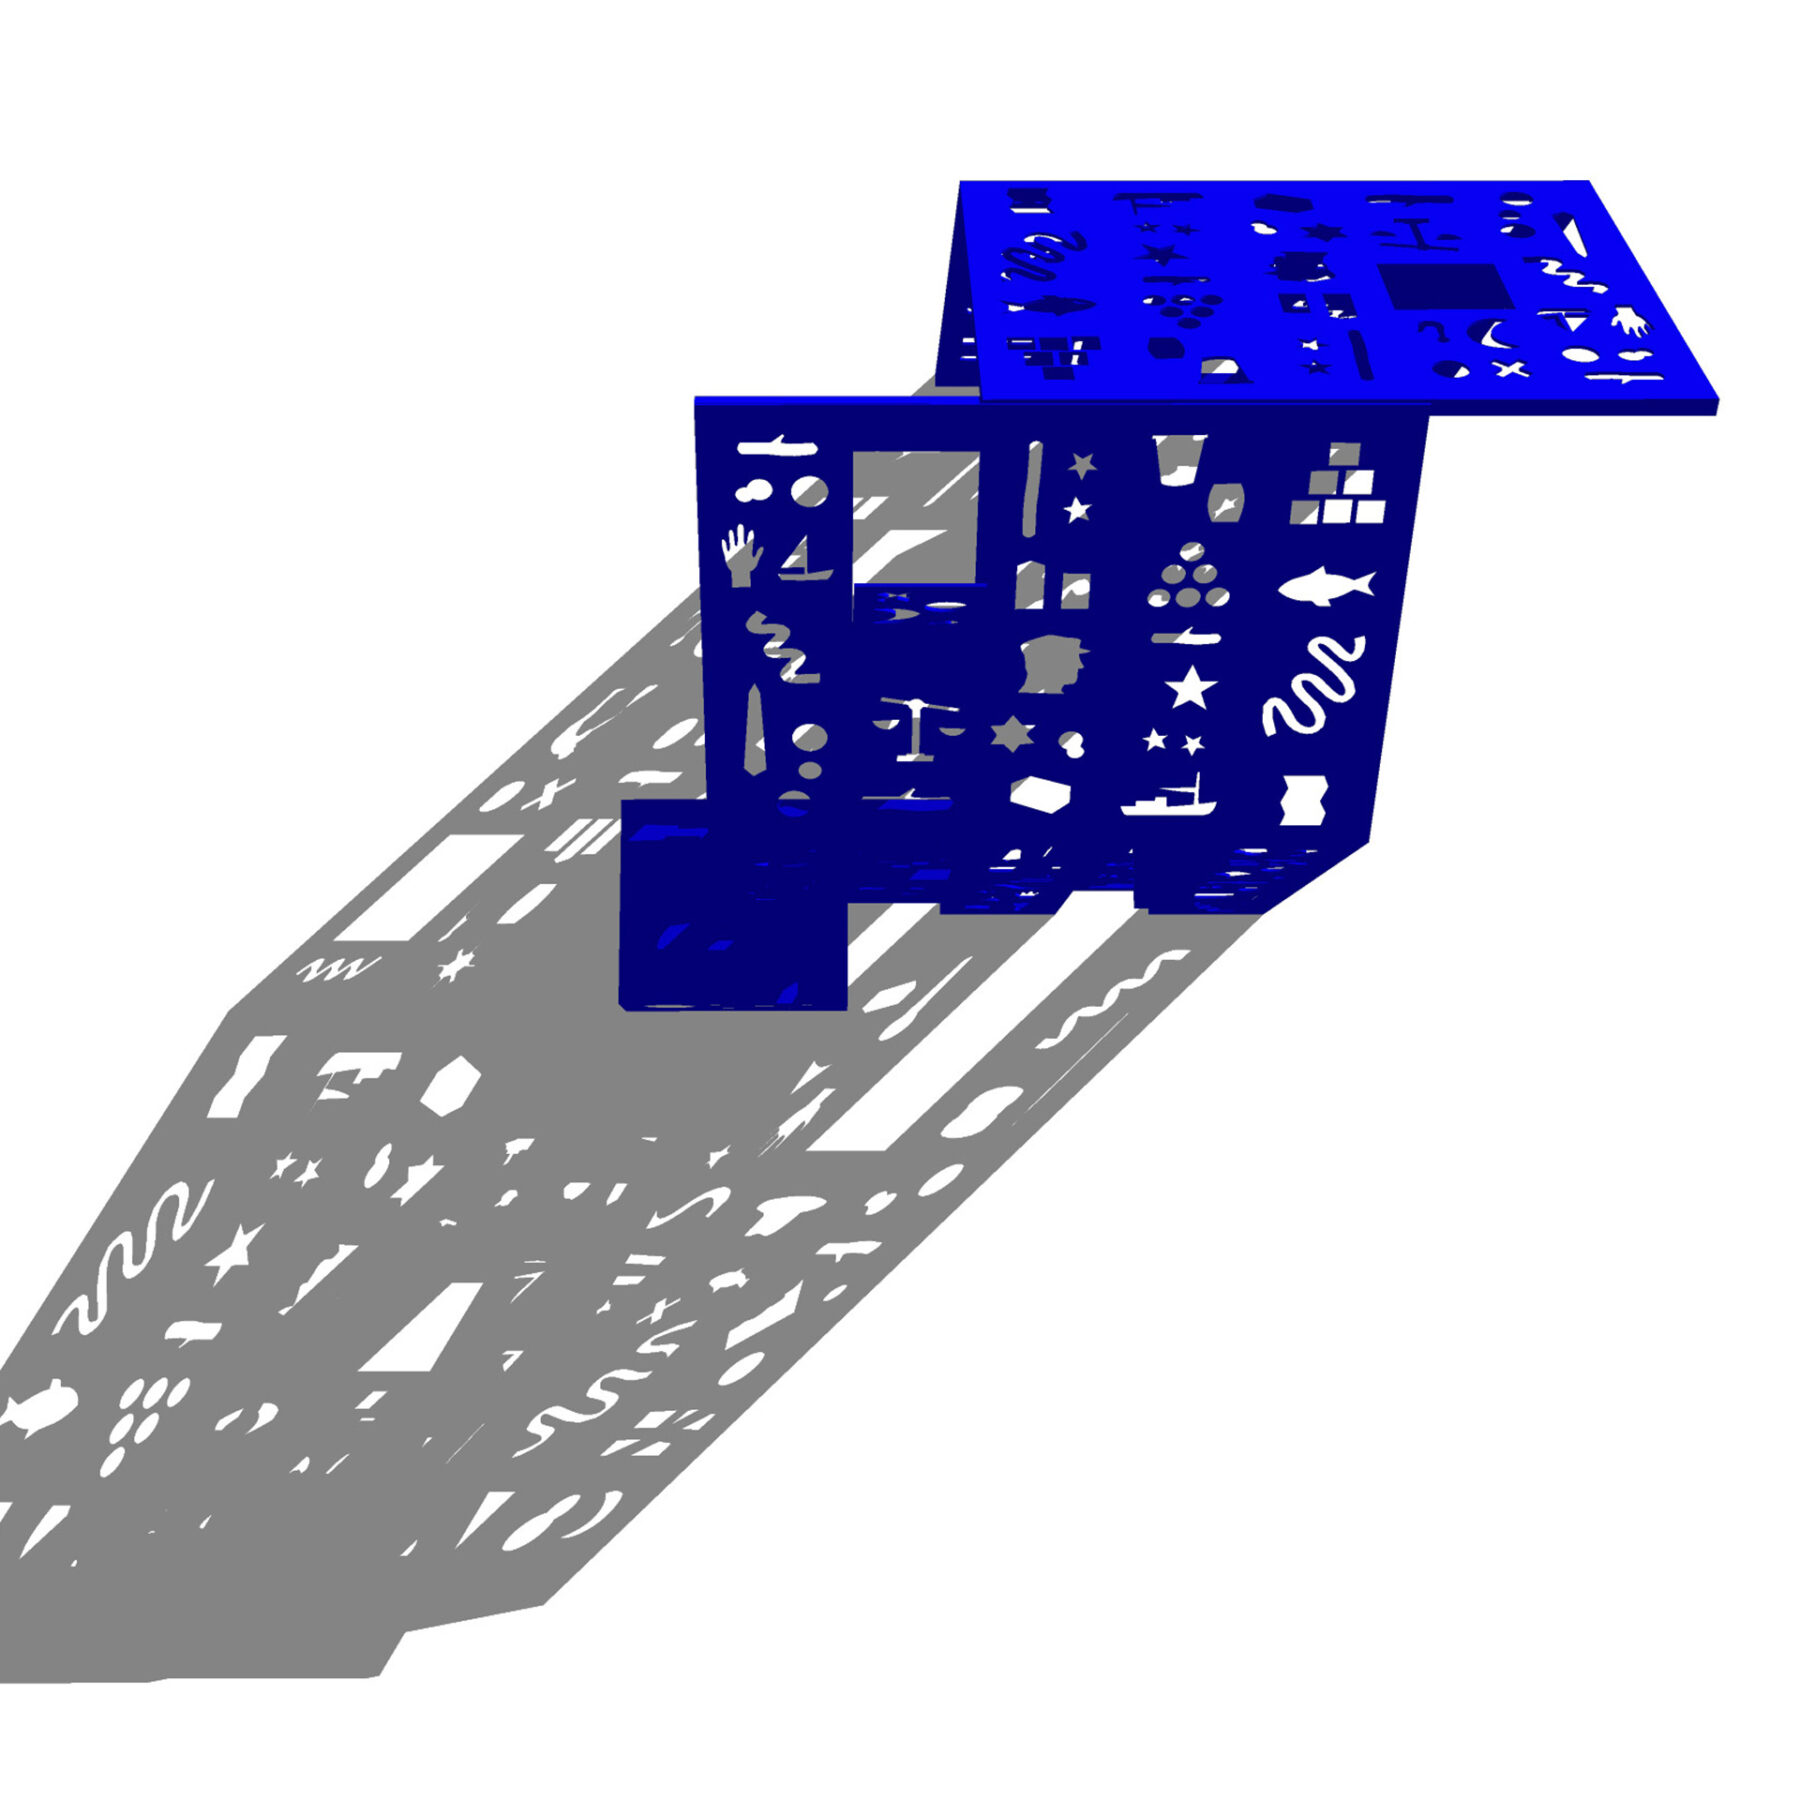 Hieroglyphic House, rendering of a proposed public art installation of a deep blue house-like structure with walls and roofs punctured by windows of shaped iconographic imagery. Sunlight streaming through these openings casts shadows on the ground.